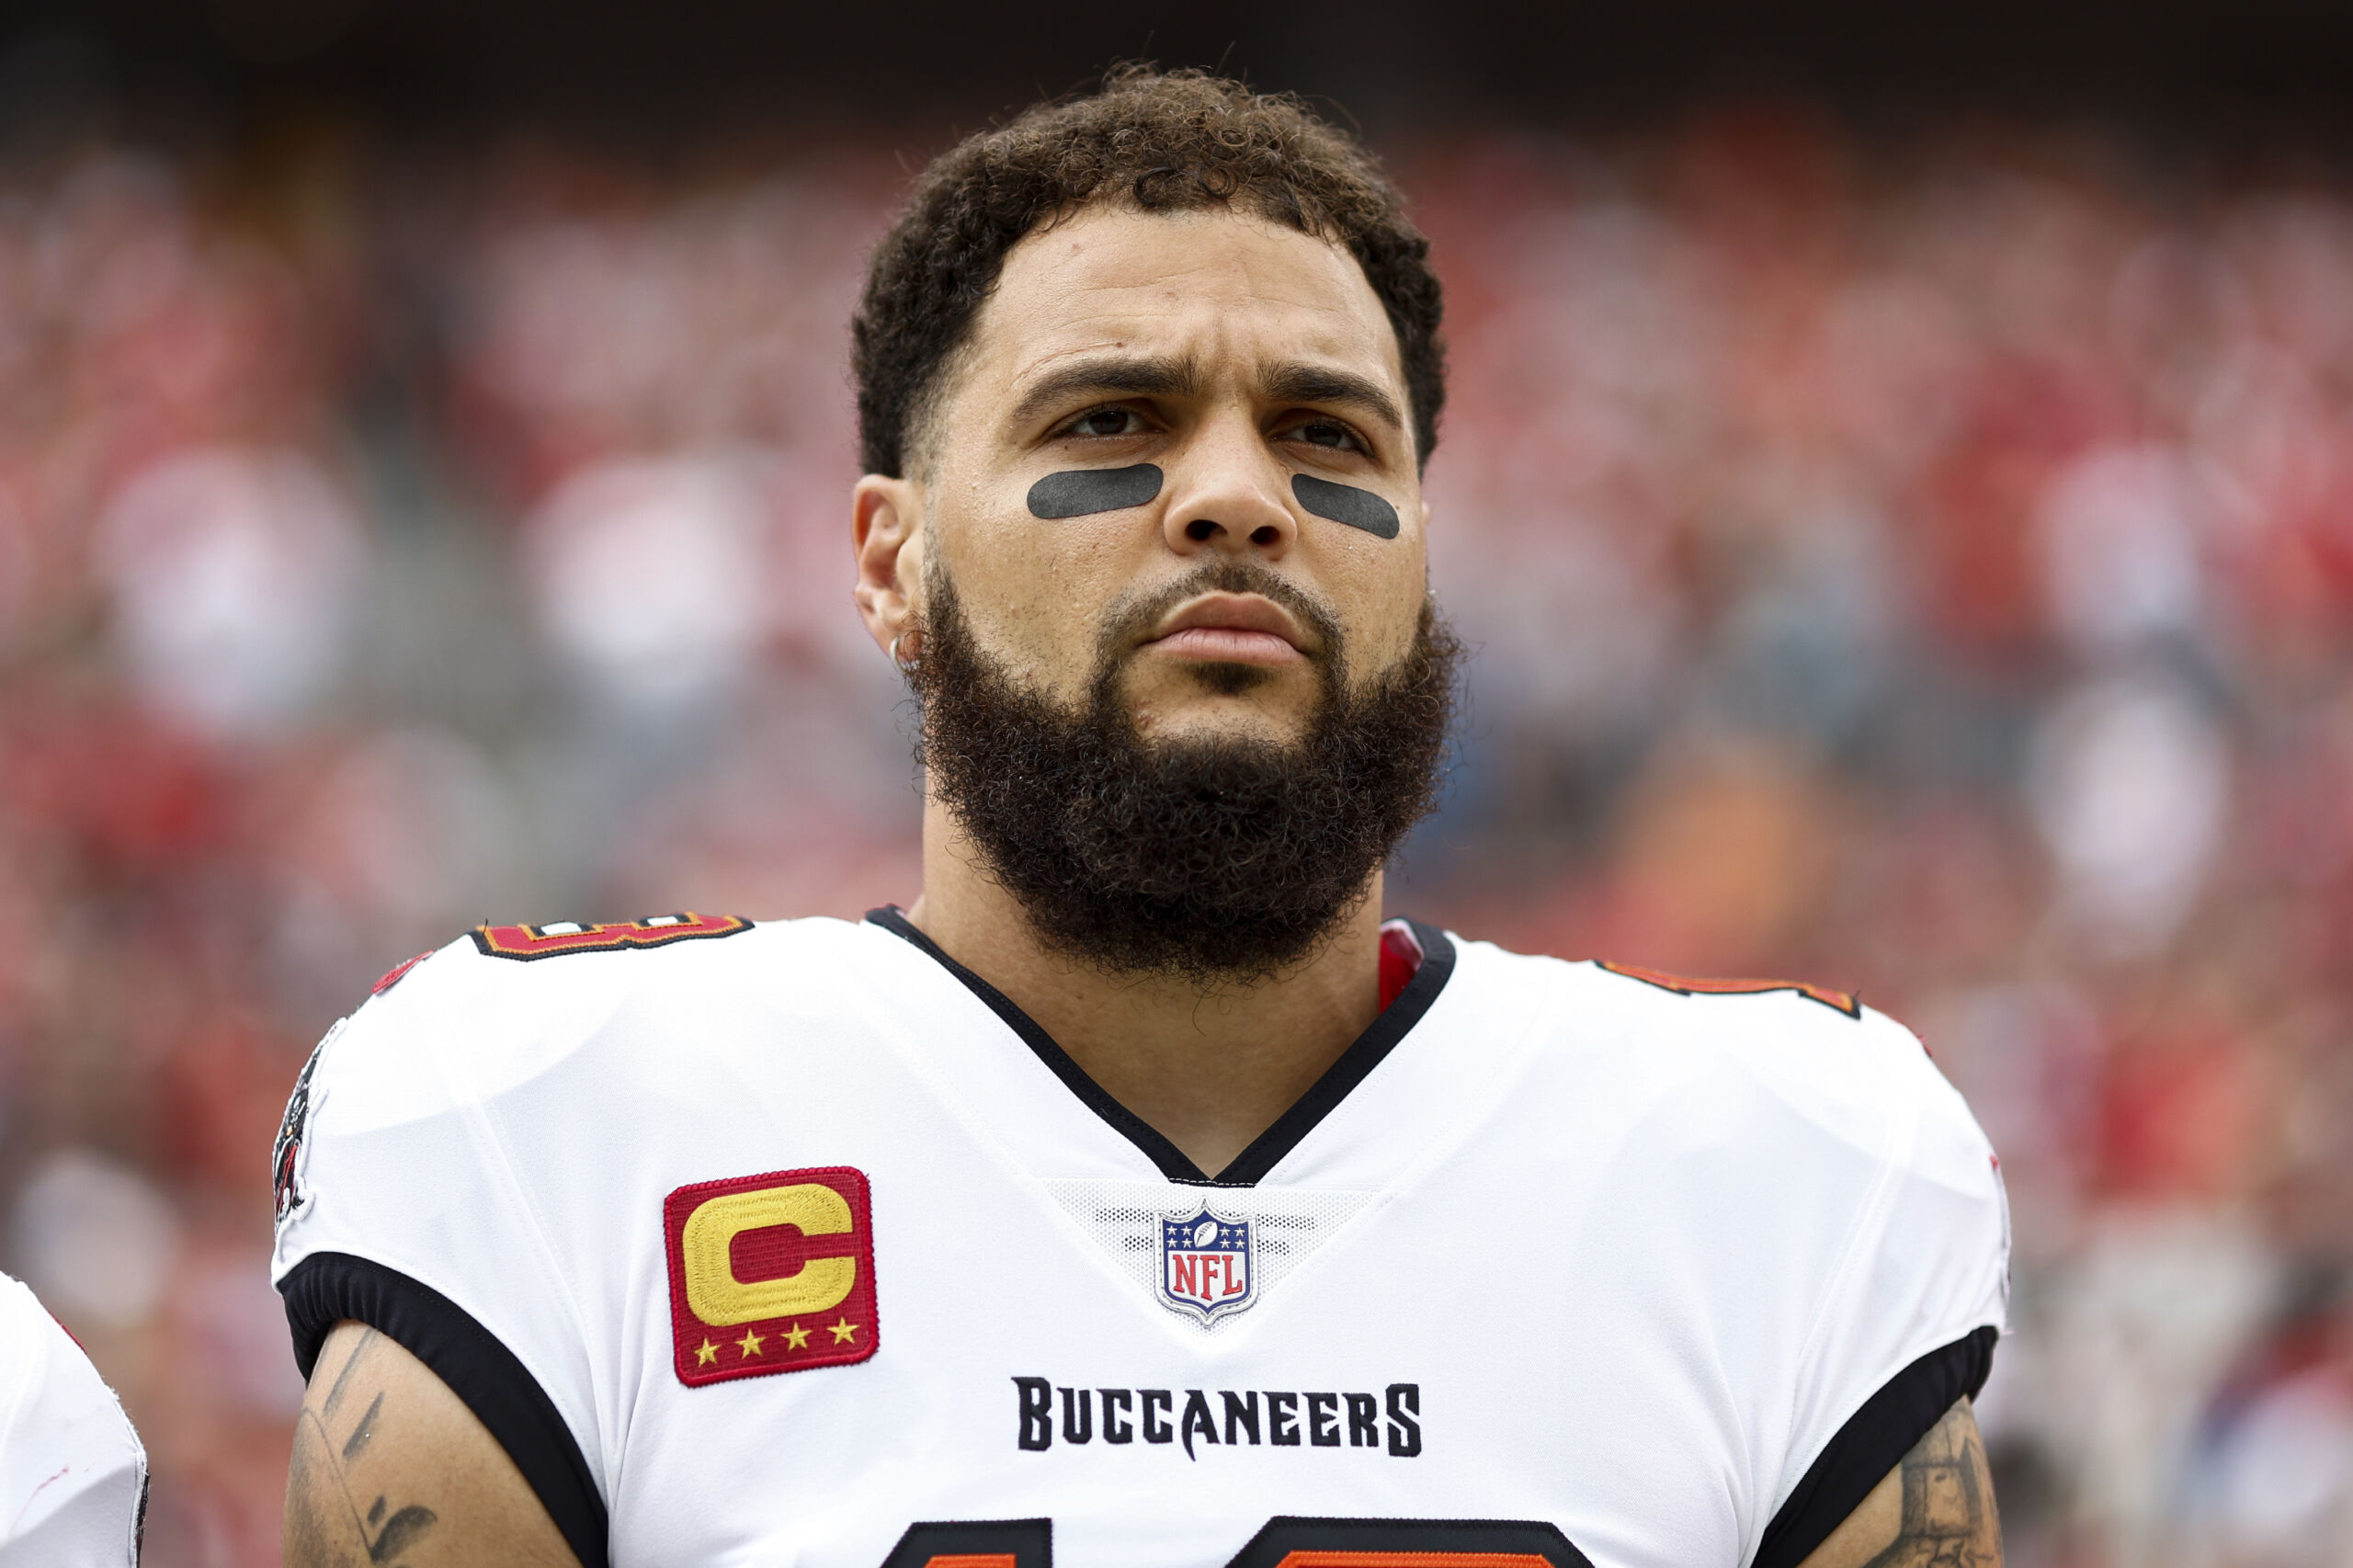 Buccaneers-Mike Evans contract drama; NFL teams intently watching